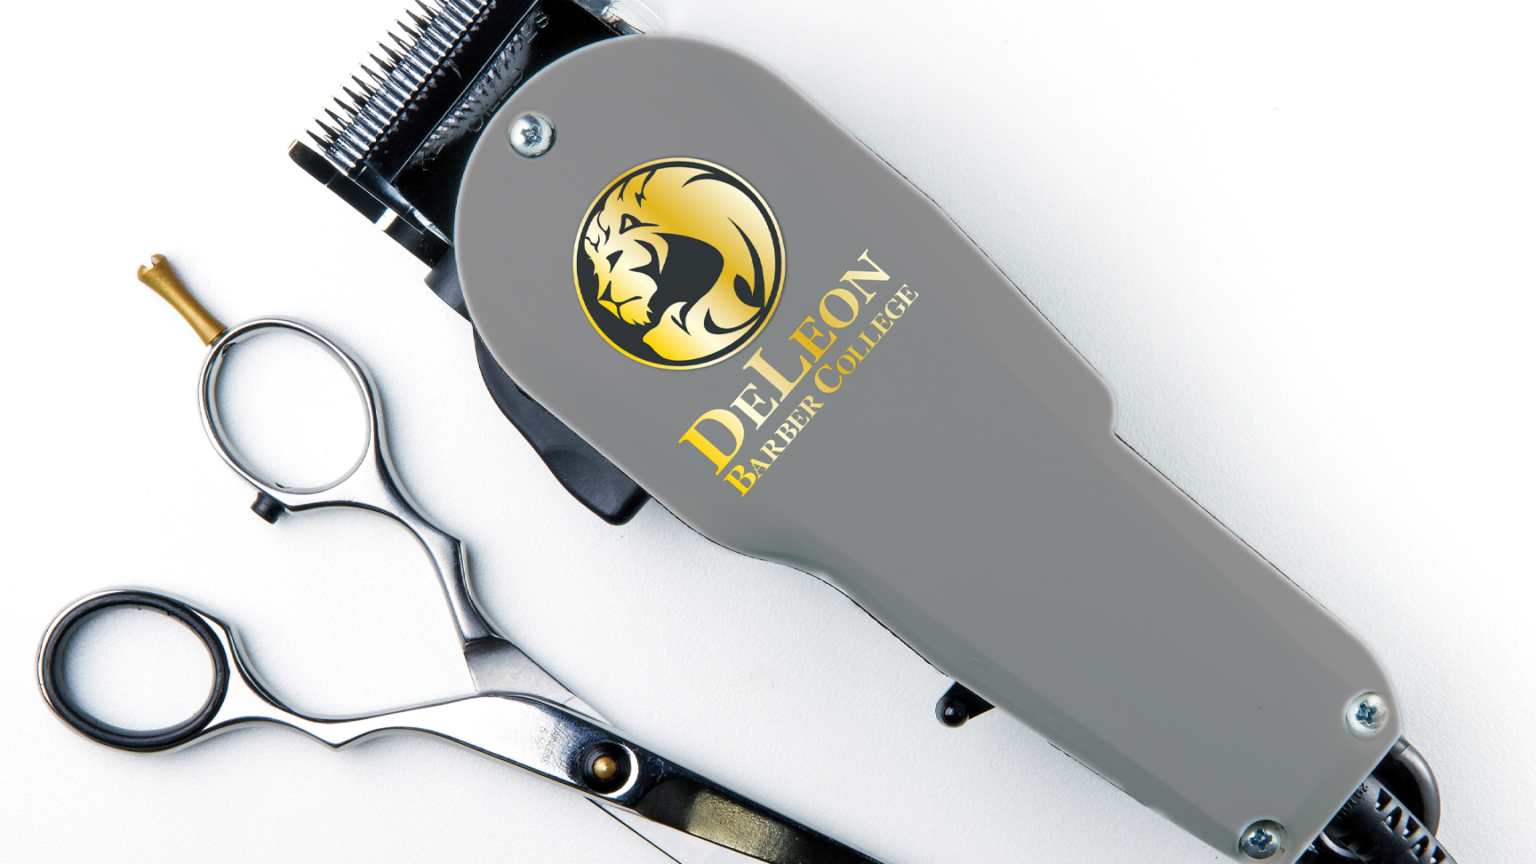 Barber Clippers and Scisors Mock Up for DeLeon Barber College